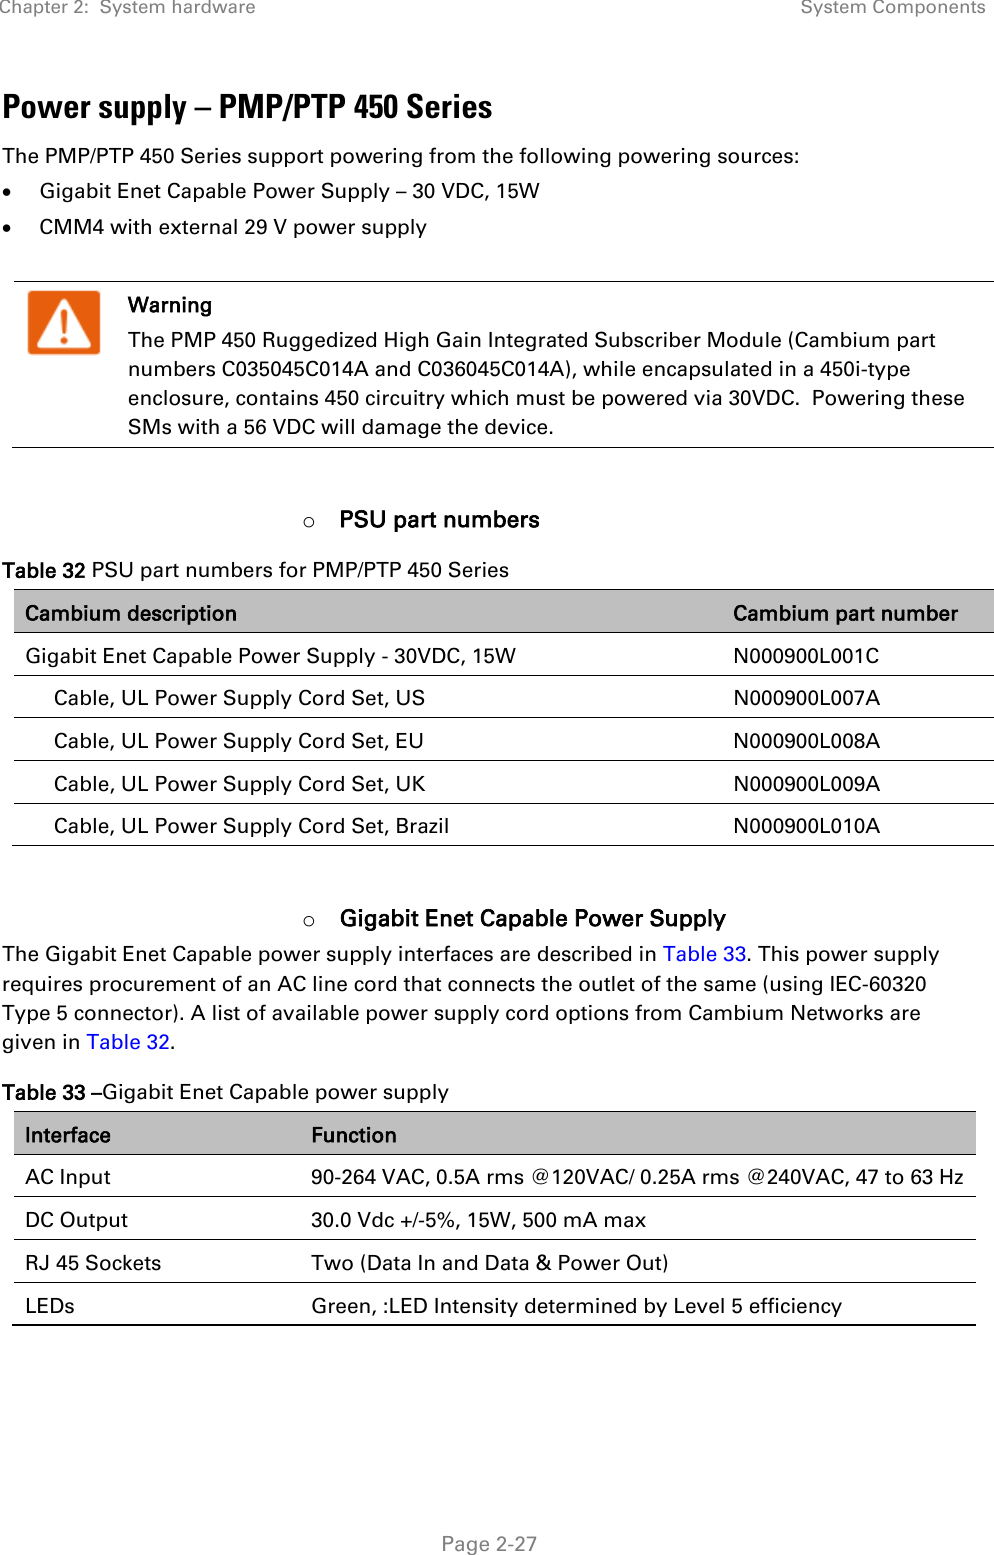 Chapter 2:  System hardware System Components   Page 2-27 Power supply – PMP/PTP 450 Series The PMP/PTP 450 Series support powering from the following powering sources: • Gigabit Enet Capable Power Supply – 30 VDC, 15W  • CMM4 with external 29 V power supply   Warning The PMP 450 Ruggedized High Gain Integrated Subscriber Module (Cambium part numbers C035045C014A and C036045C014A), while encapsulated in a 450i-type enclosure, contains 450 circuitry which must be powered via 30VDC.  Powering these SMs with a 56 VDC will damage the device.  o PSU part numbers Table 32 PSU part numbers for PMP/PTP 450 Series Cambium description Cambium part number Gigabit Enet Capable Power Supply - 30VDC, 15W N000900L001C      Cable, UL Power Supply Cord Set, US N000900L007A      Cable, UL Power Supply Cord Set, EU N000900L008A      Cable, UL Power Supply Cord Set, UK N000900L009A      Cable, UL Power Supply Cord Set, Brazil N000900L010A  o Gigabit Enet Capable Power Supply The Gigabit Enet Capable power supply interfaces are described in Table 33. This power supply requires procurement of an AC line cord that connects the outlet of the same (using IEC-60320 Type 5 connector). A list of available power supply cord options from Cambium Networks are given in Table 32. Table 33 –Gigabit Enet Capable power supply Interface Function AC Input 90-264 VAC, 0.5A rms @120VAC/ 0.25A rms @240VAC, 47 to 63 Hz DC Output 30.0 Vdc +/-5%, 15W, 500 mA max RJ 45 Sockets Two (Data In and Data &amp; Power Out) LEDs Green, :LED Intensity determined by Level 5 efficiency  